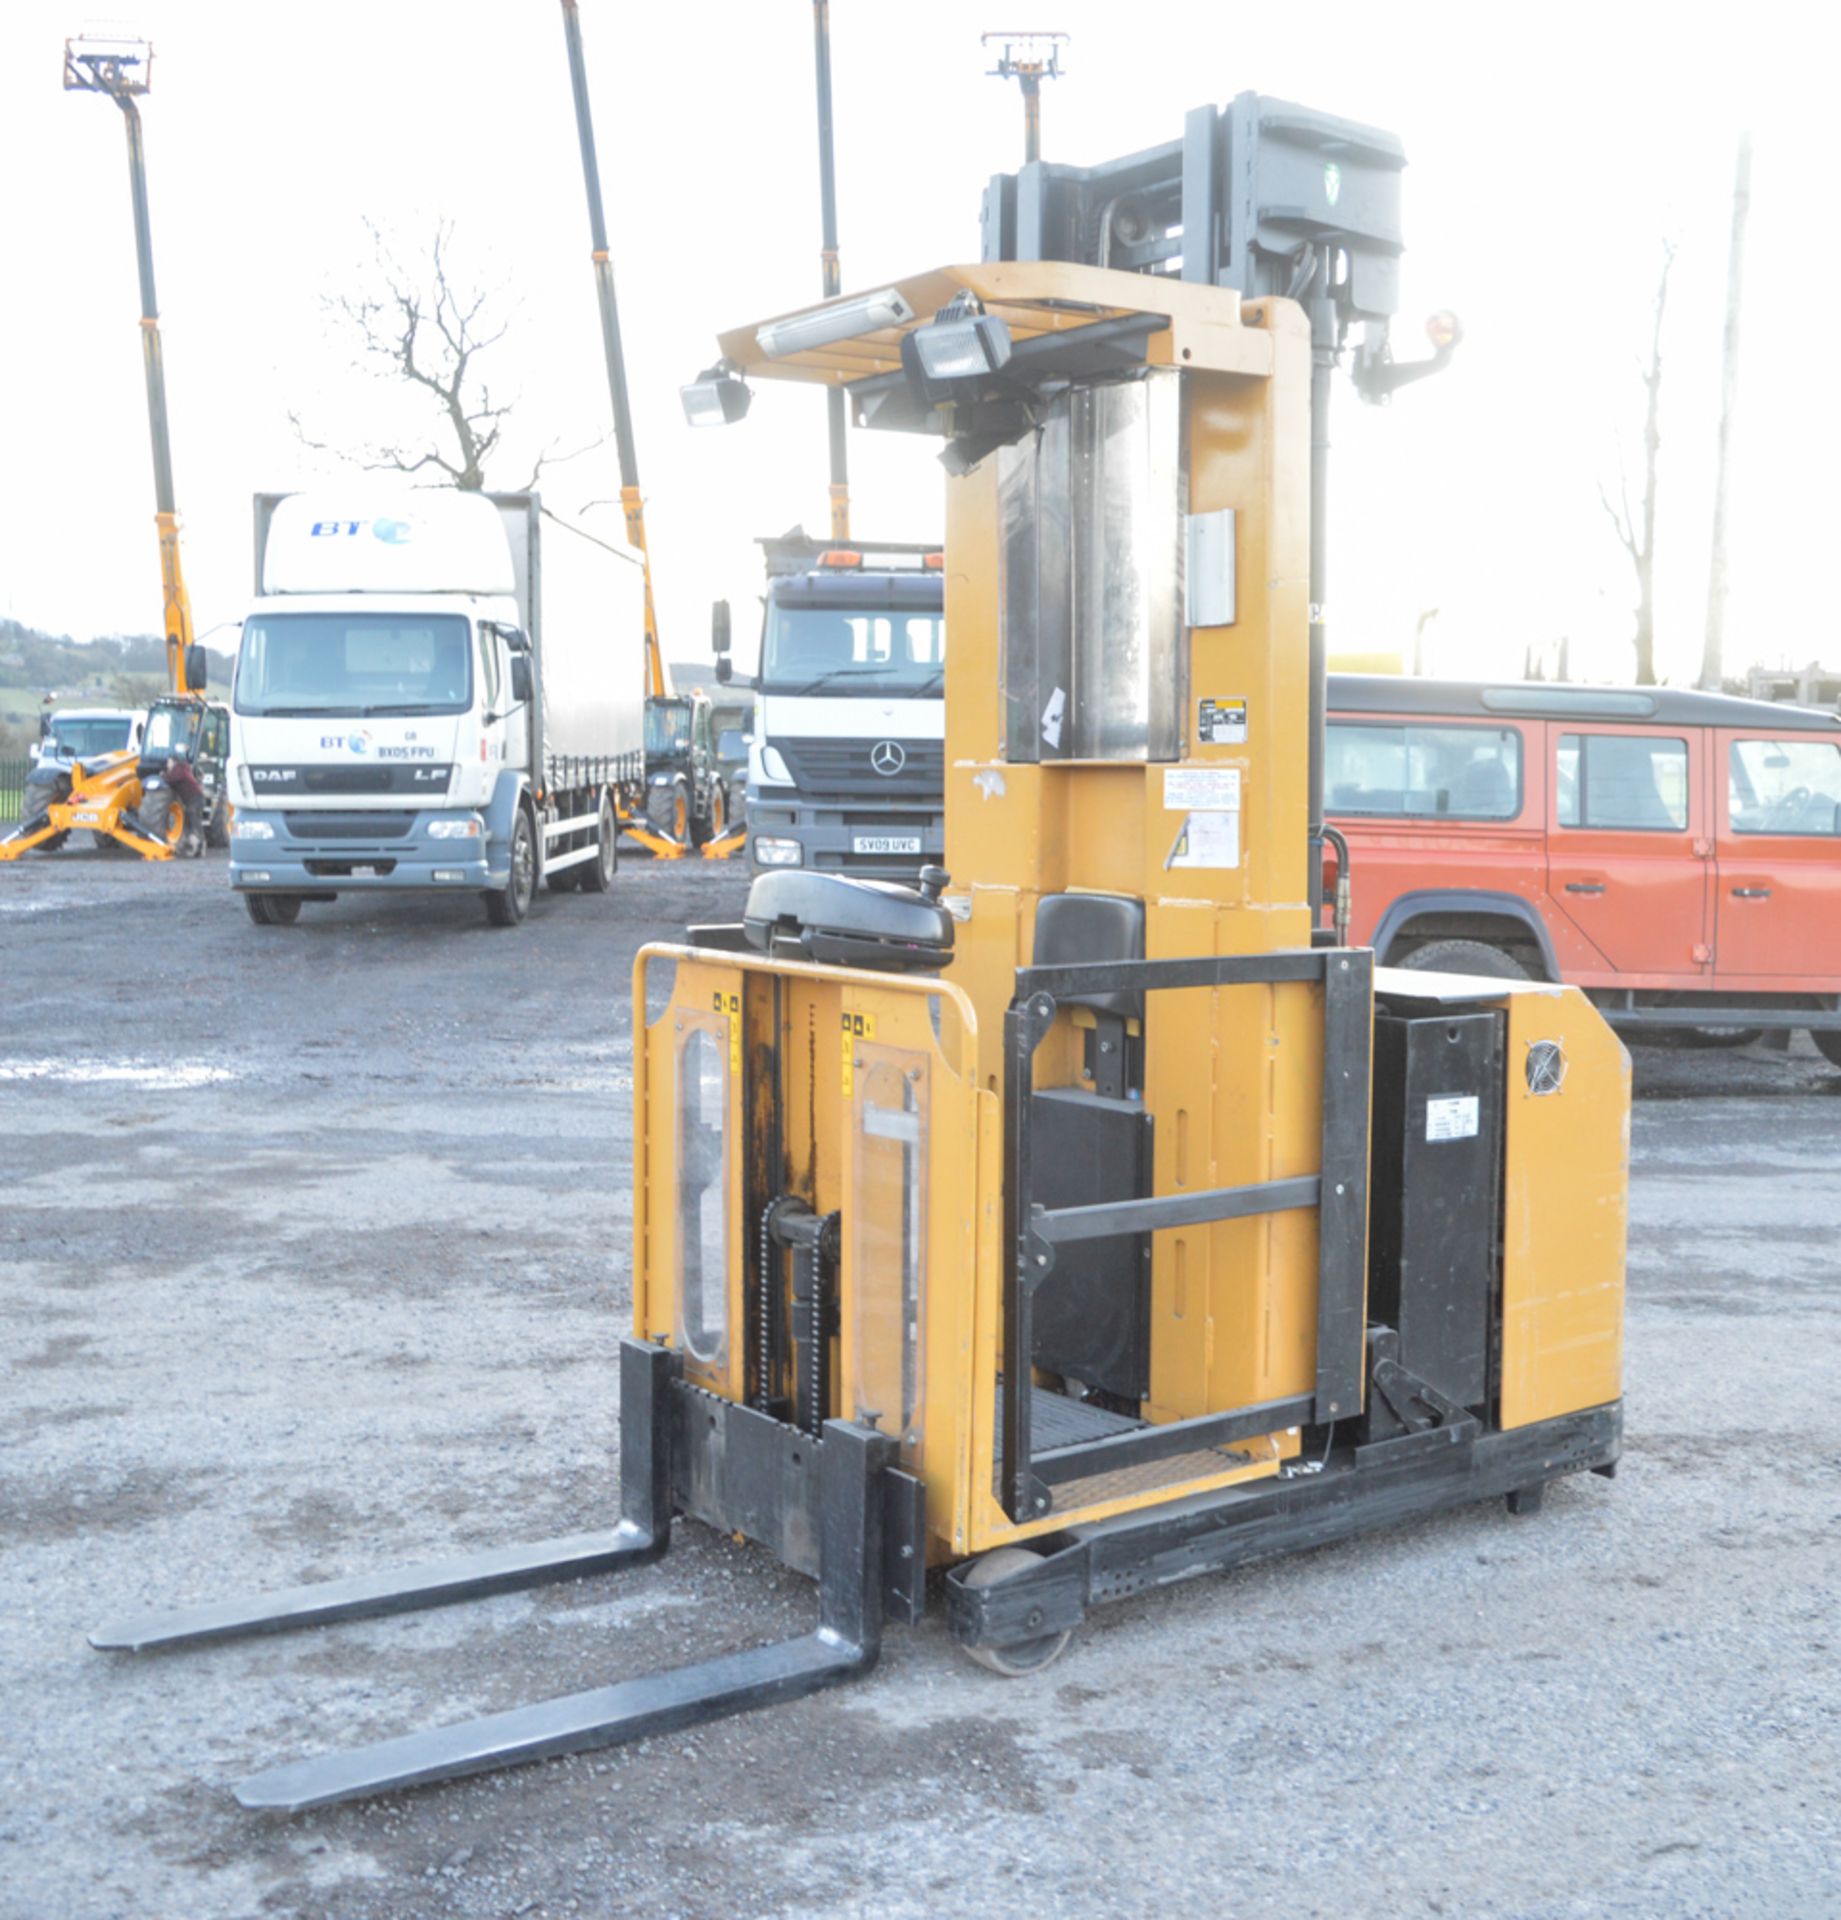 Caterpillar NOH08K battery electric high level order picker fork lift truck S/N: 1000346 Recorded - Image 4 of 6